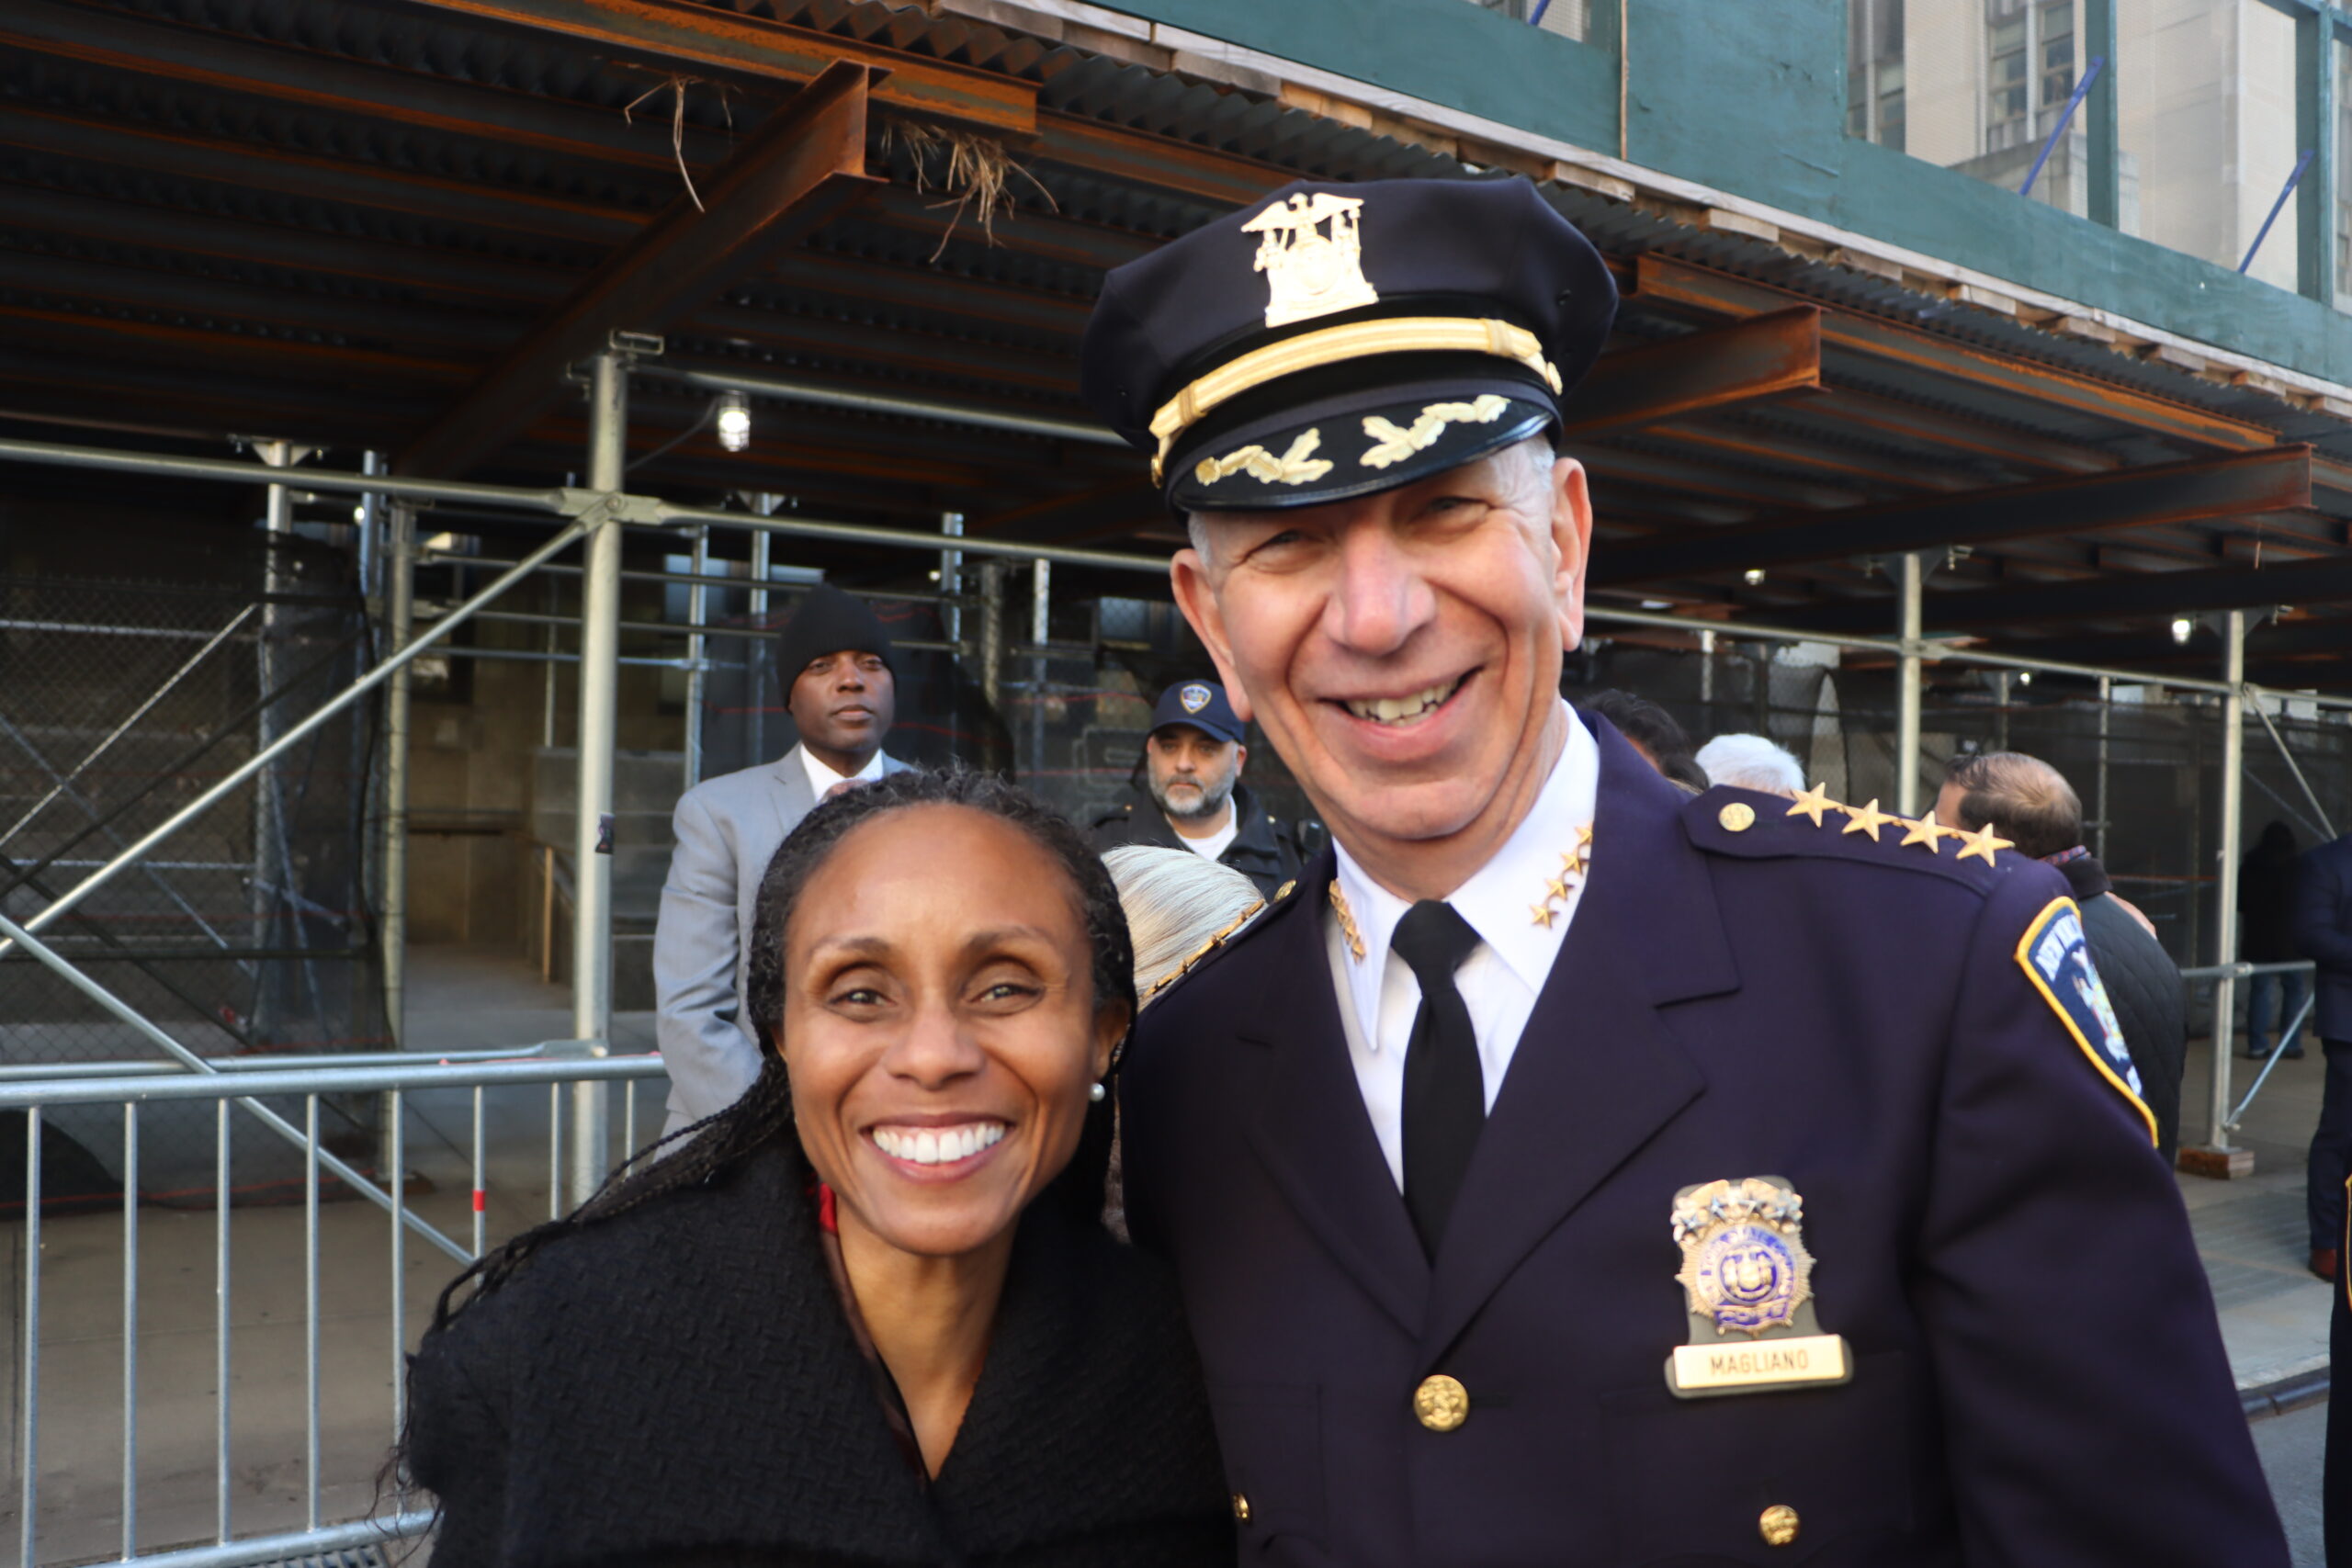 Hon. Tamiko Amaker, deputy chief administrative Judge for Management Support, and Michael Magliano, chief of Public Safety for the NYS Courts sending off Dennis Quirk.